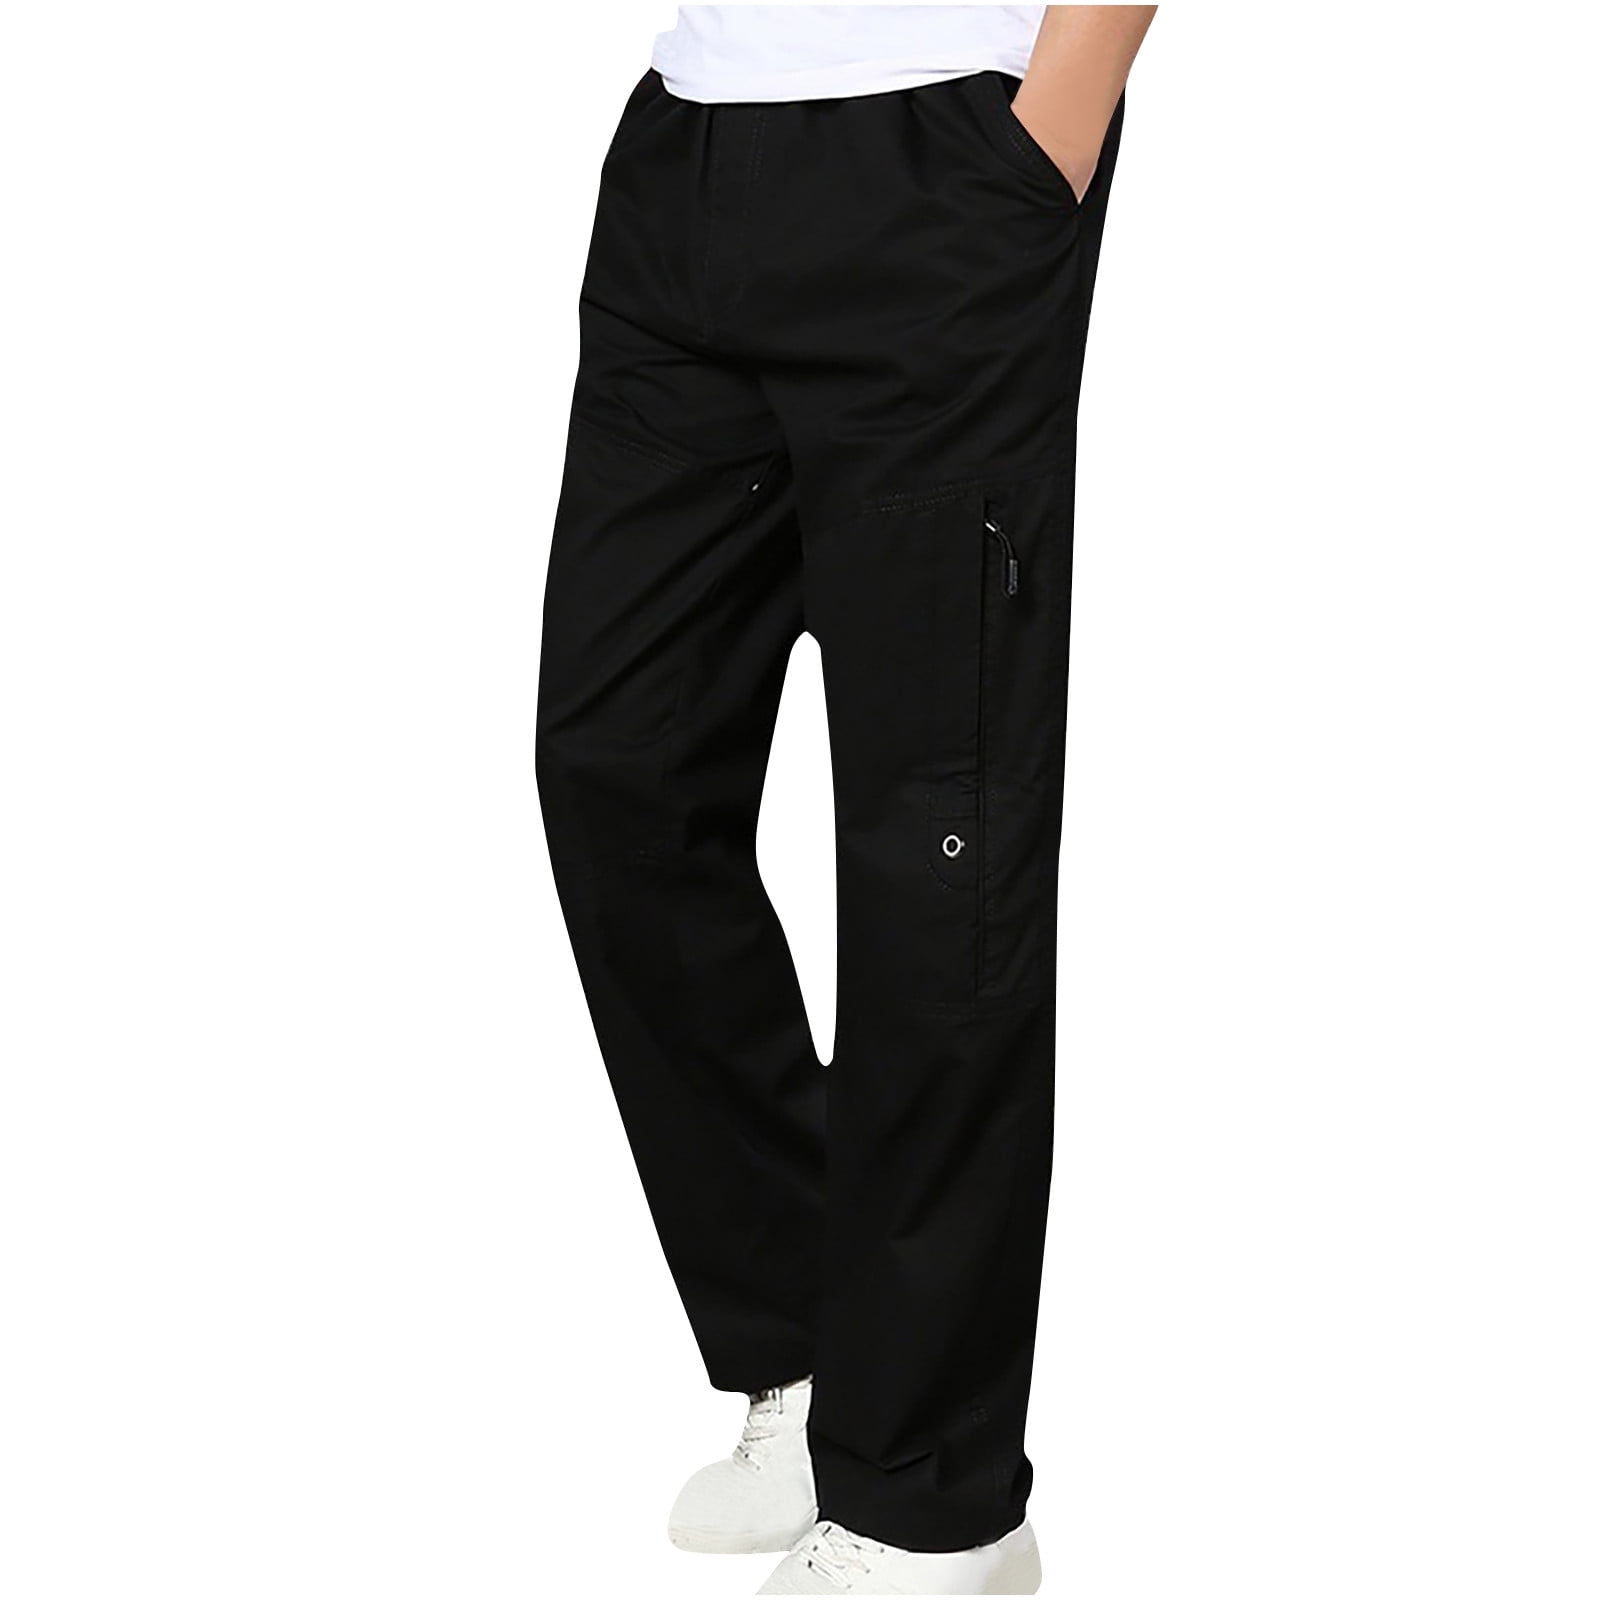 Cethrio Mens Cargo Pants Relaxed- Fall and Winter Solid Slim Straight  Workout Sports Outdoor Casual Black Cargo Pants Size L 